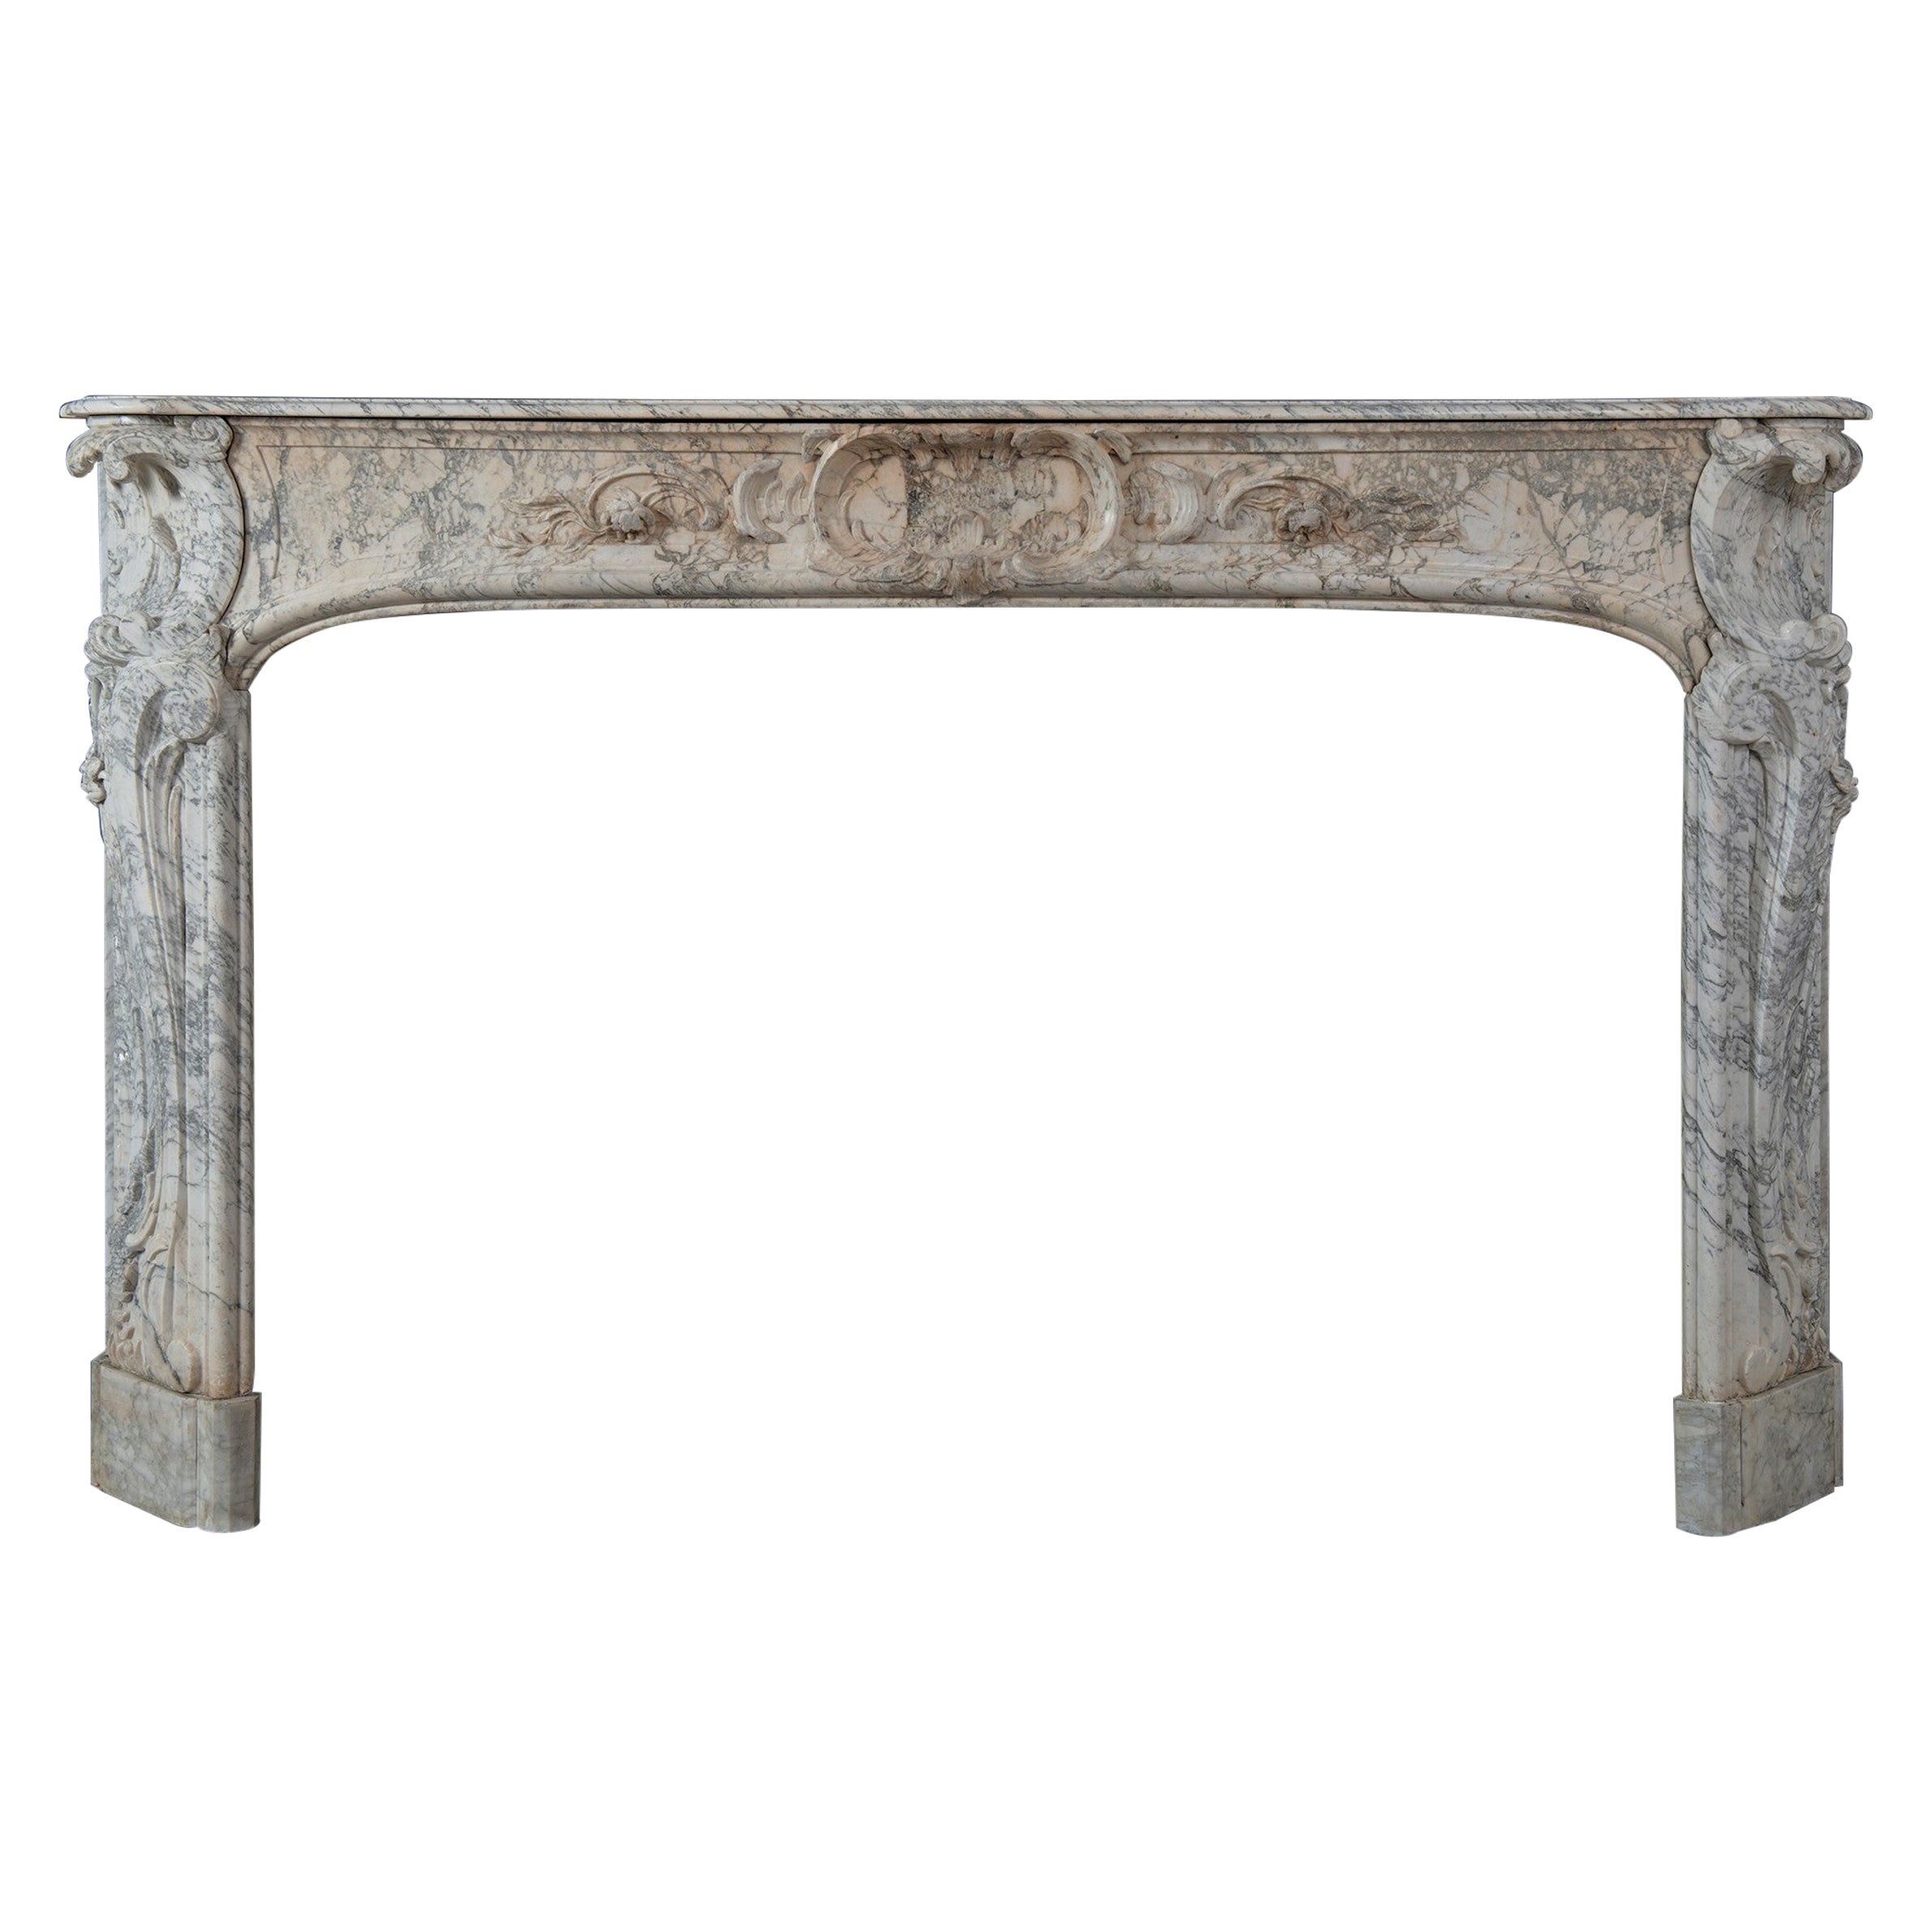 Alluring 18th Century Dutch Louis XV Fireplace Mantel For Sale